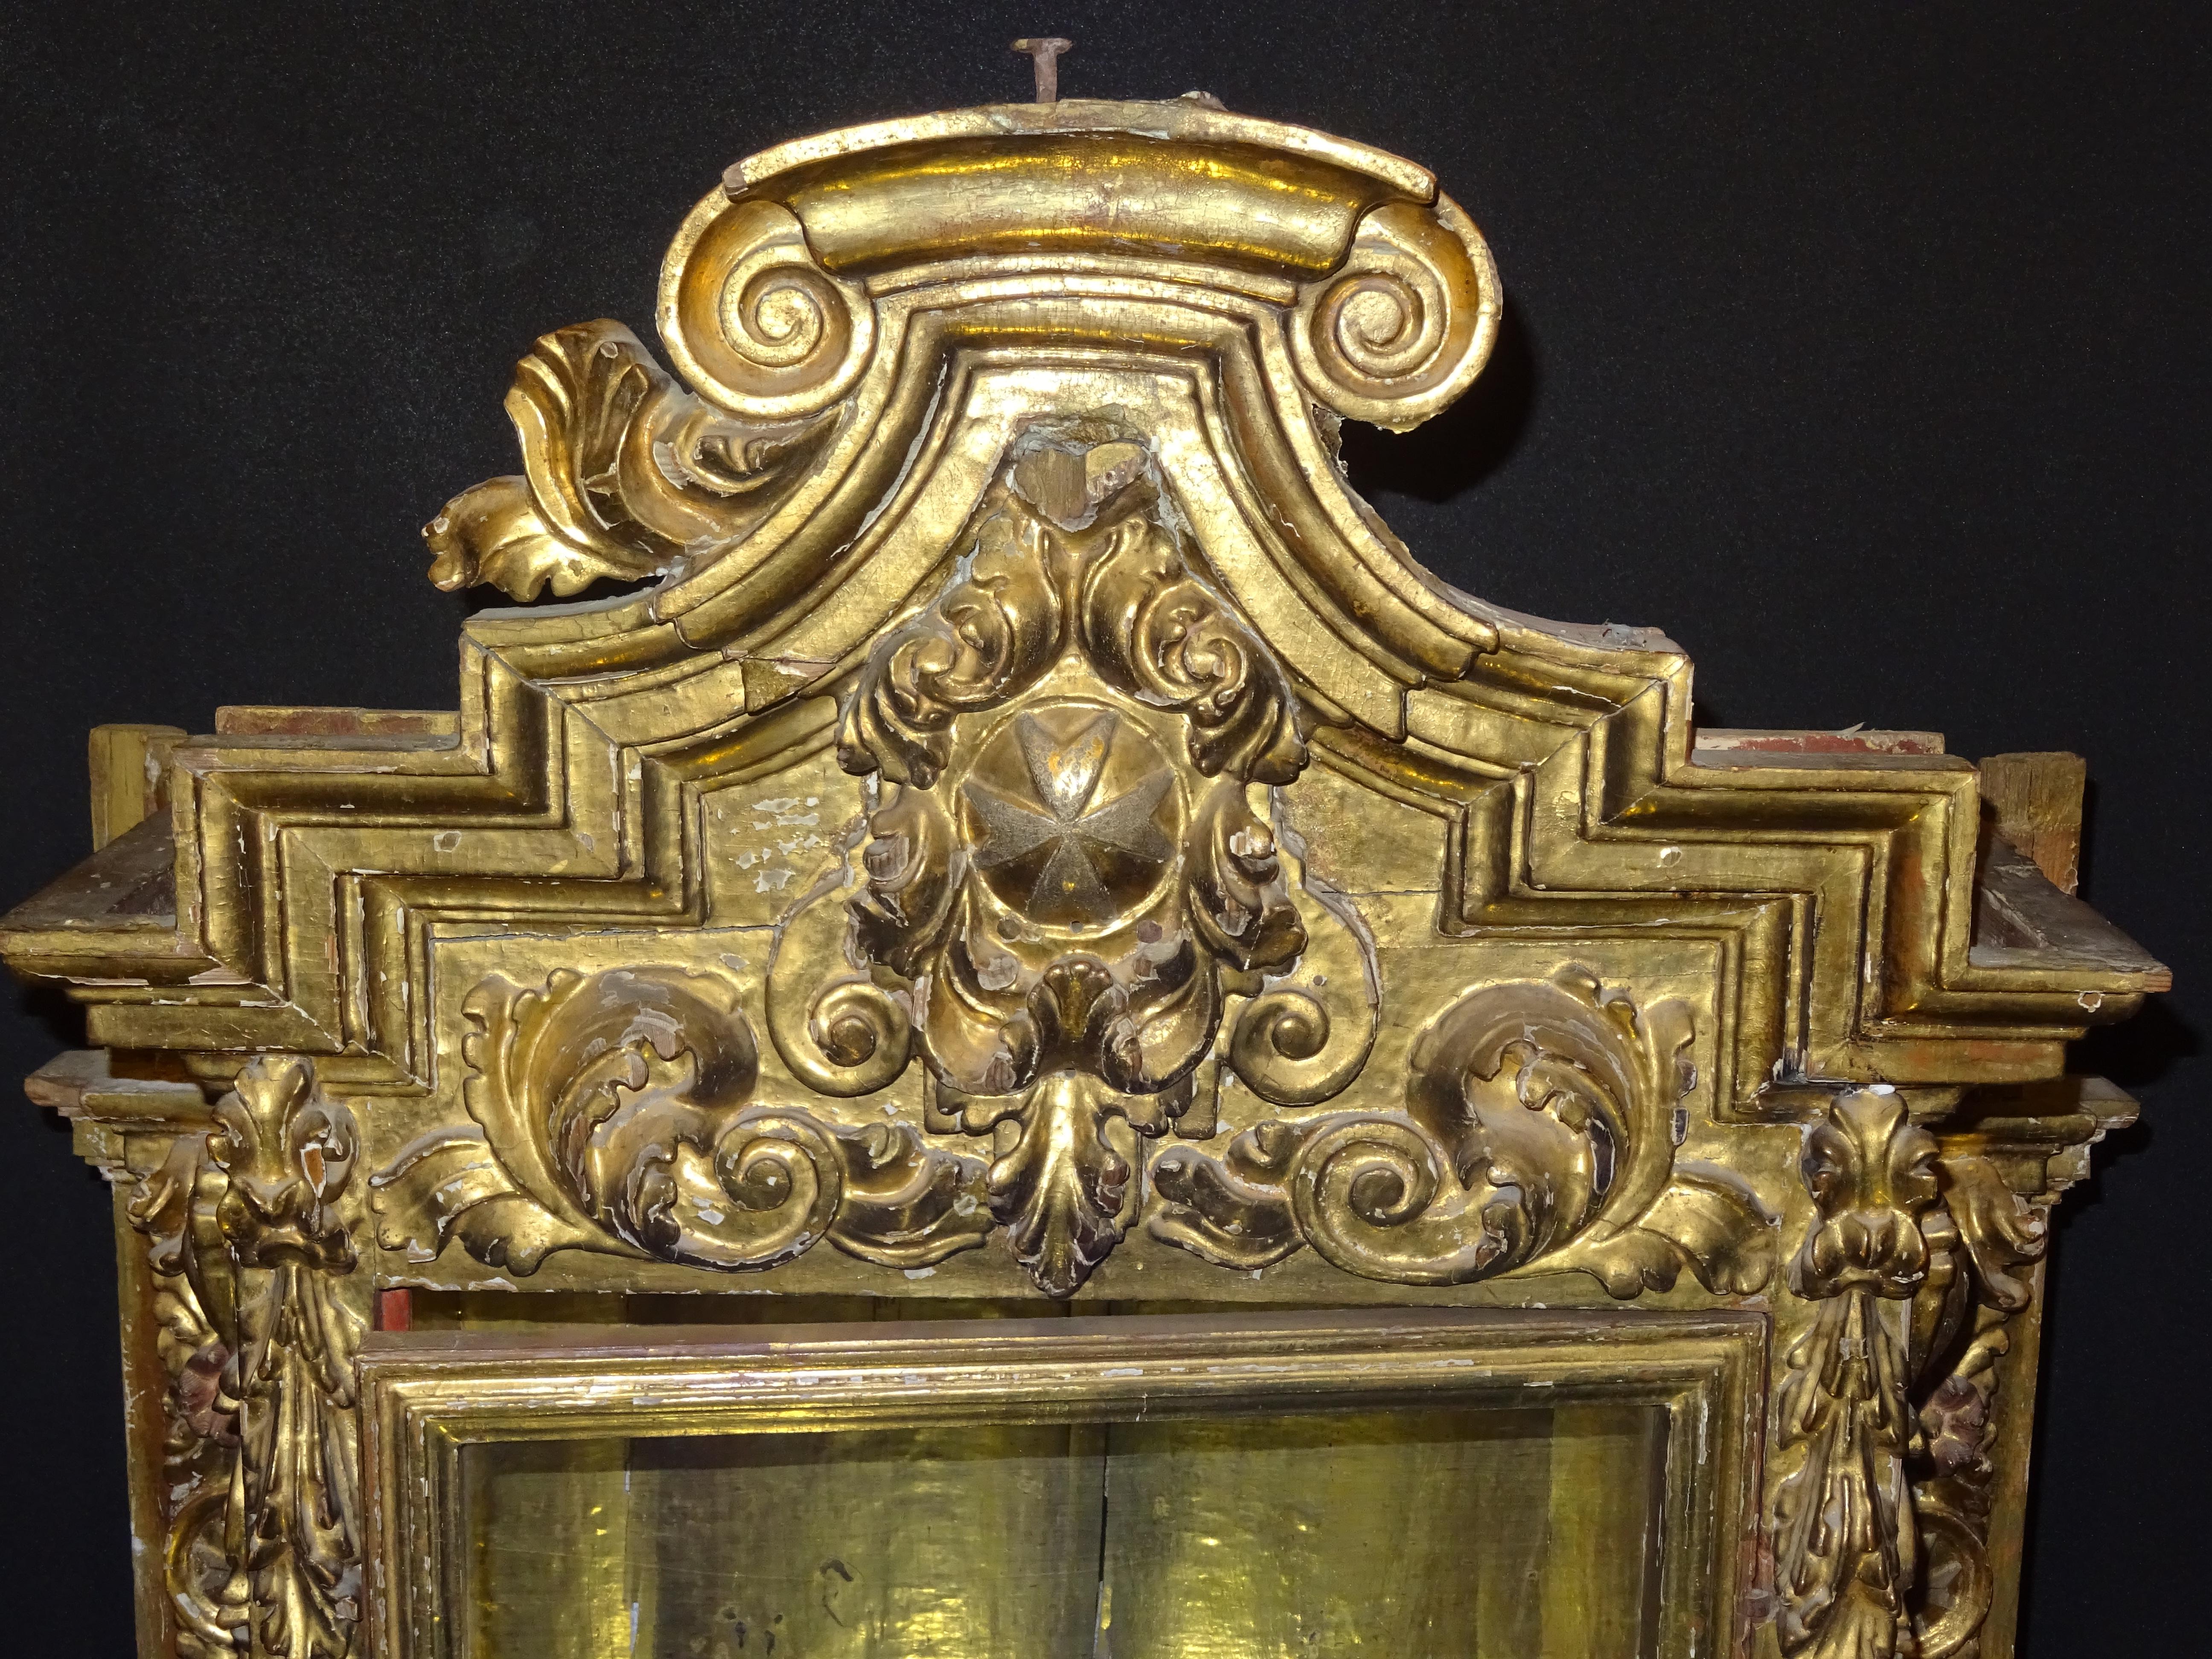 Outstanding Spanish Baroque display or vitrine in floral carved and gilded wood with a gold leaves and burnished with agate stone. It has a door with blown original glass as well as the sides.
It has some losses of wood and gold, normal for his